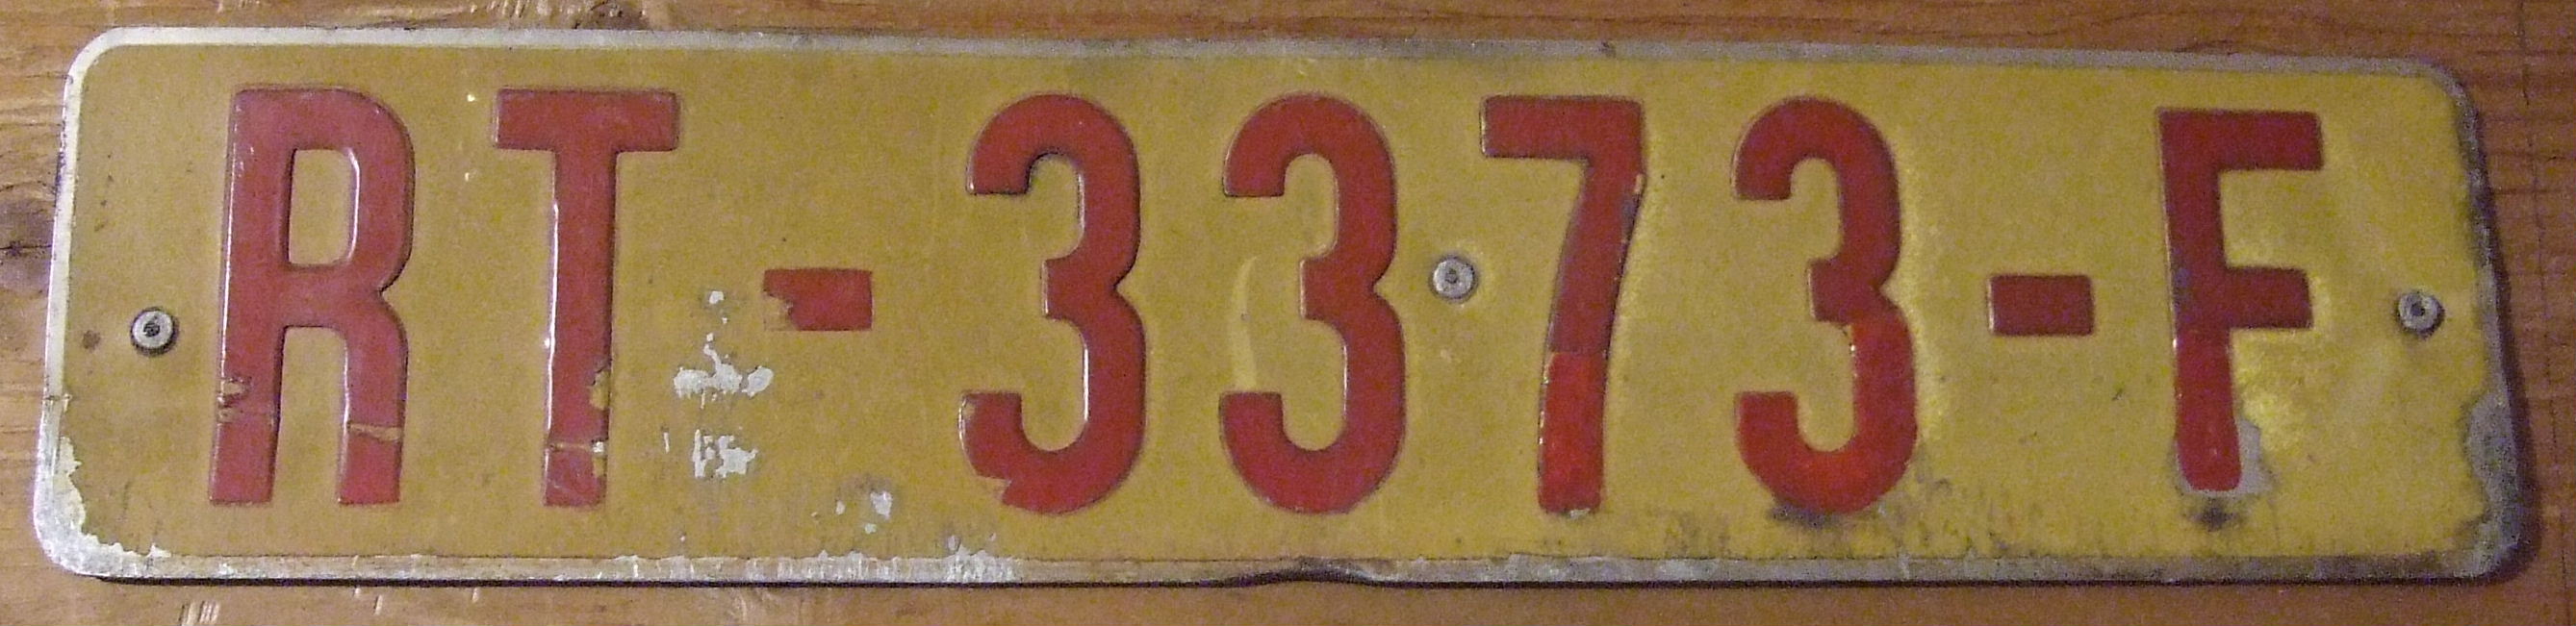 https://upload.wikimedia.org/wikipedia/commons/a/a1/License_plate_of_Togo.jpg